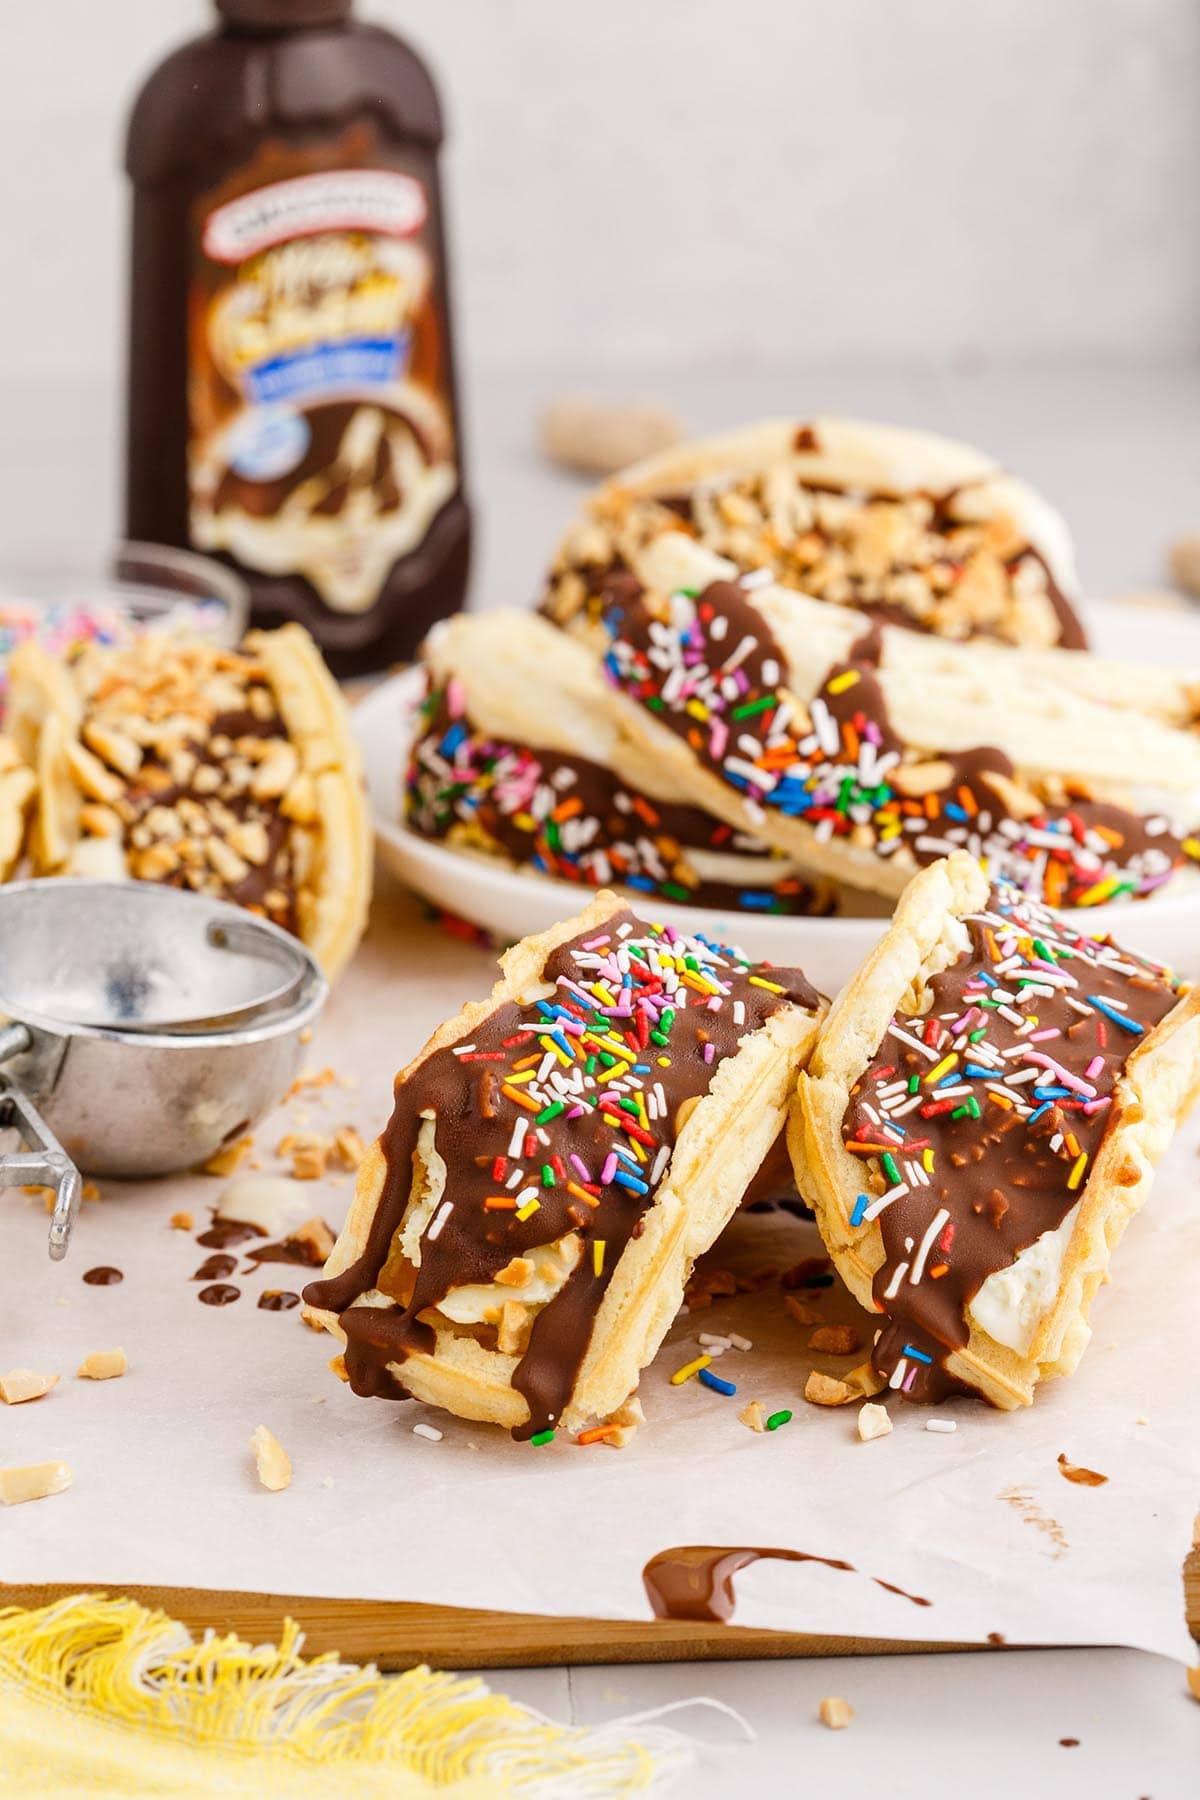 Choco Tacos with sprinkles